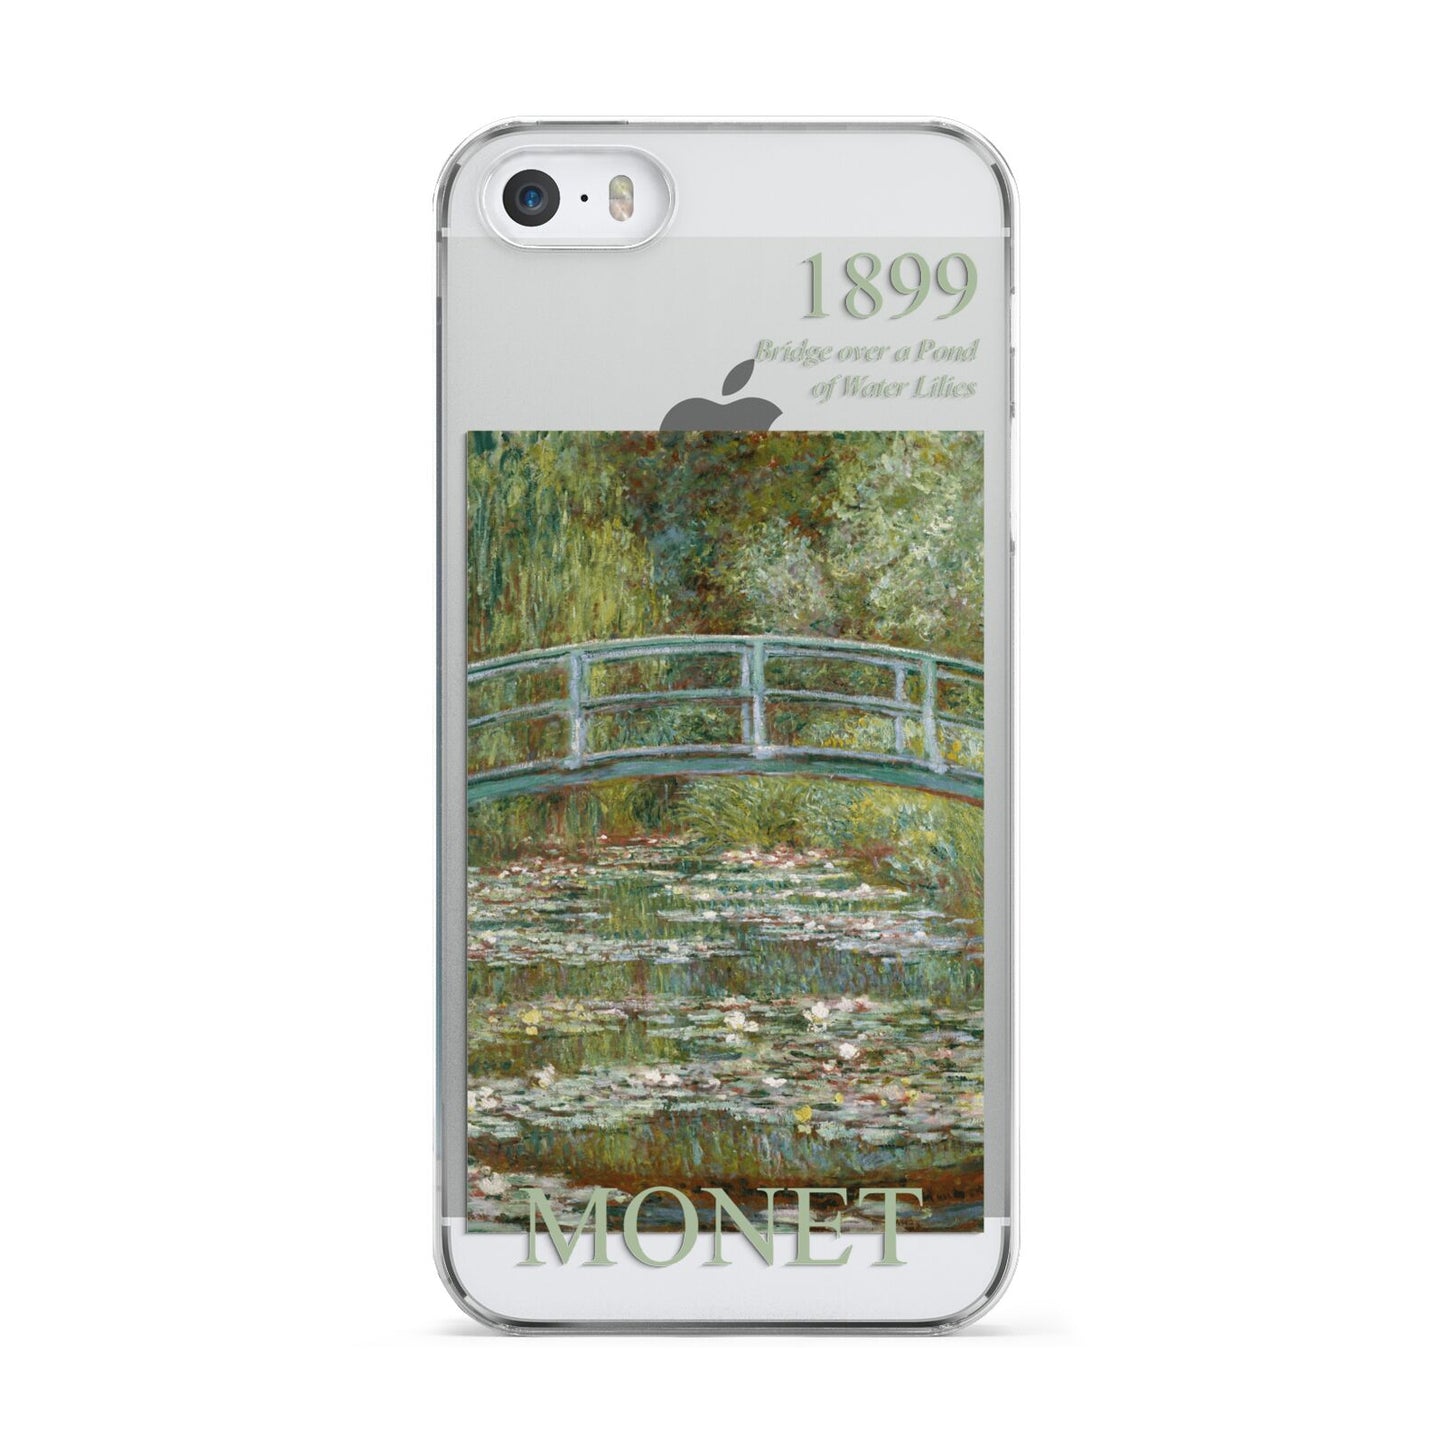 Bridge Over A Pond Of Water Lilies By Monet Apple iPhone 5 Case